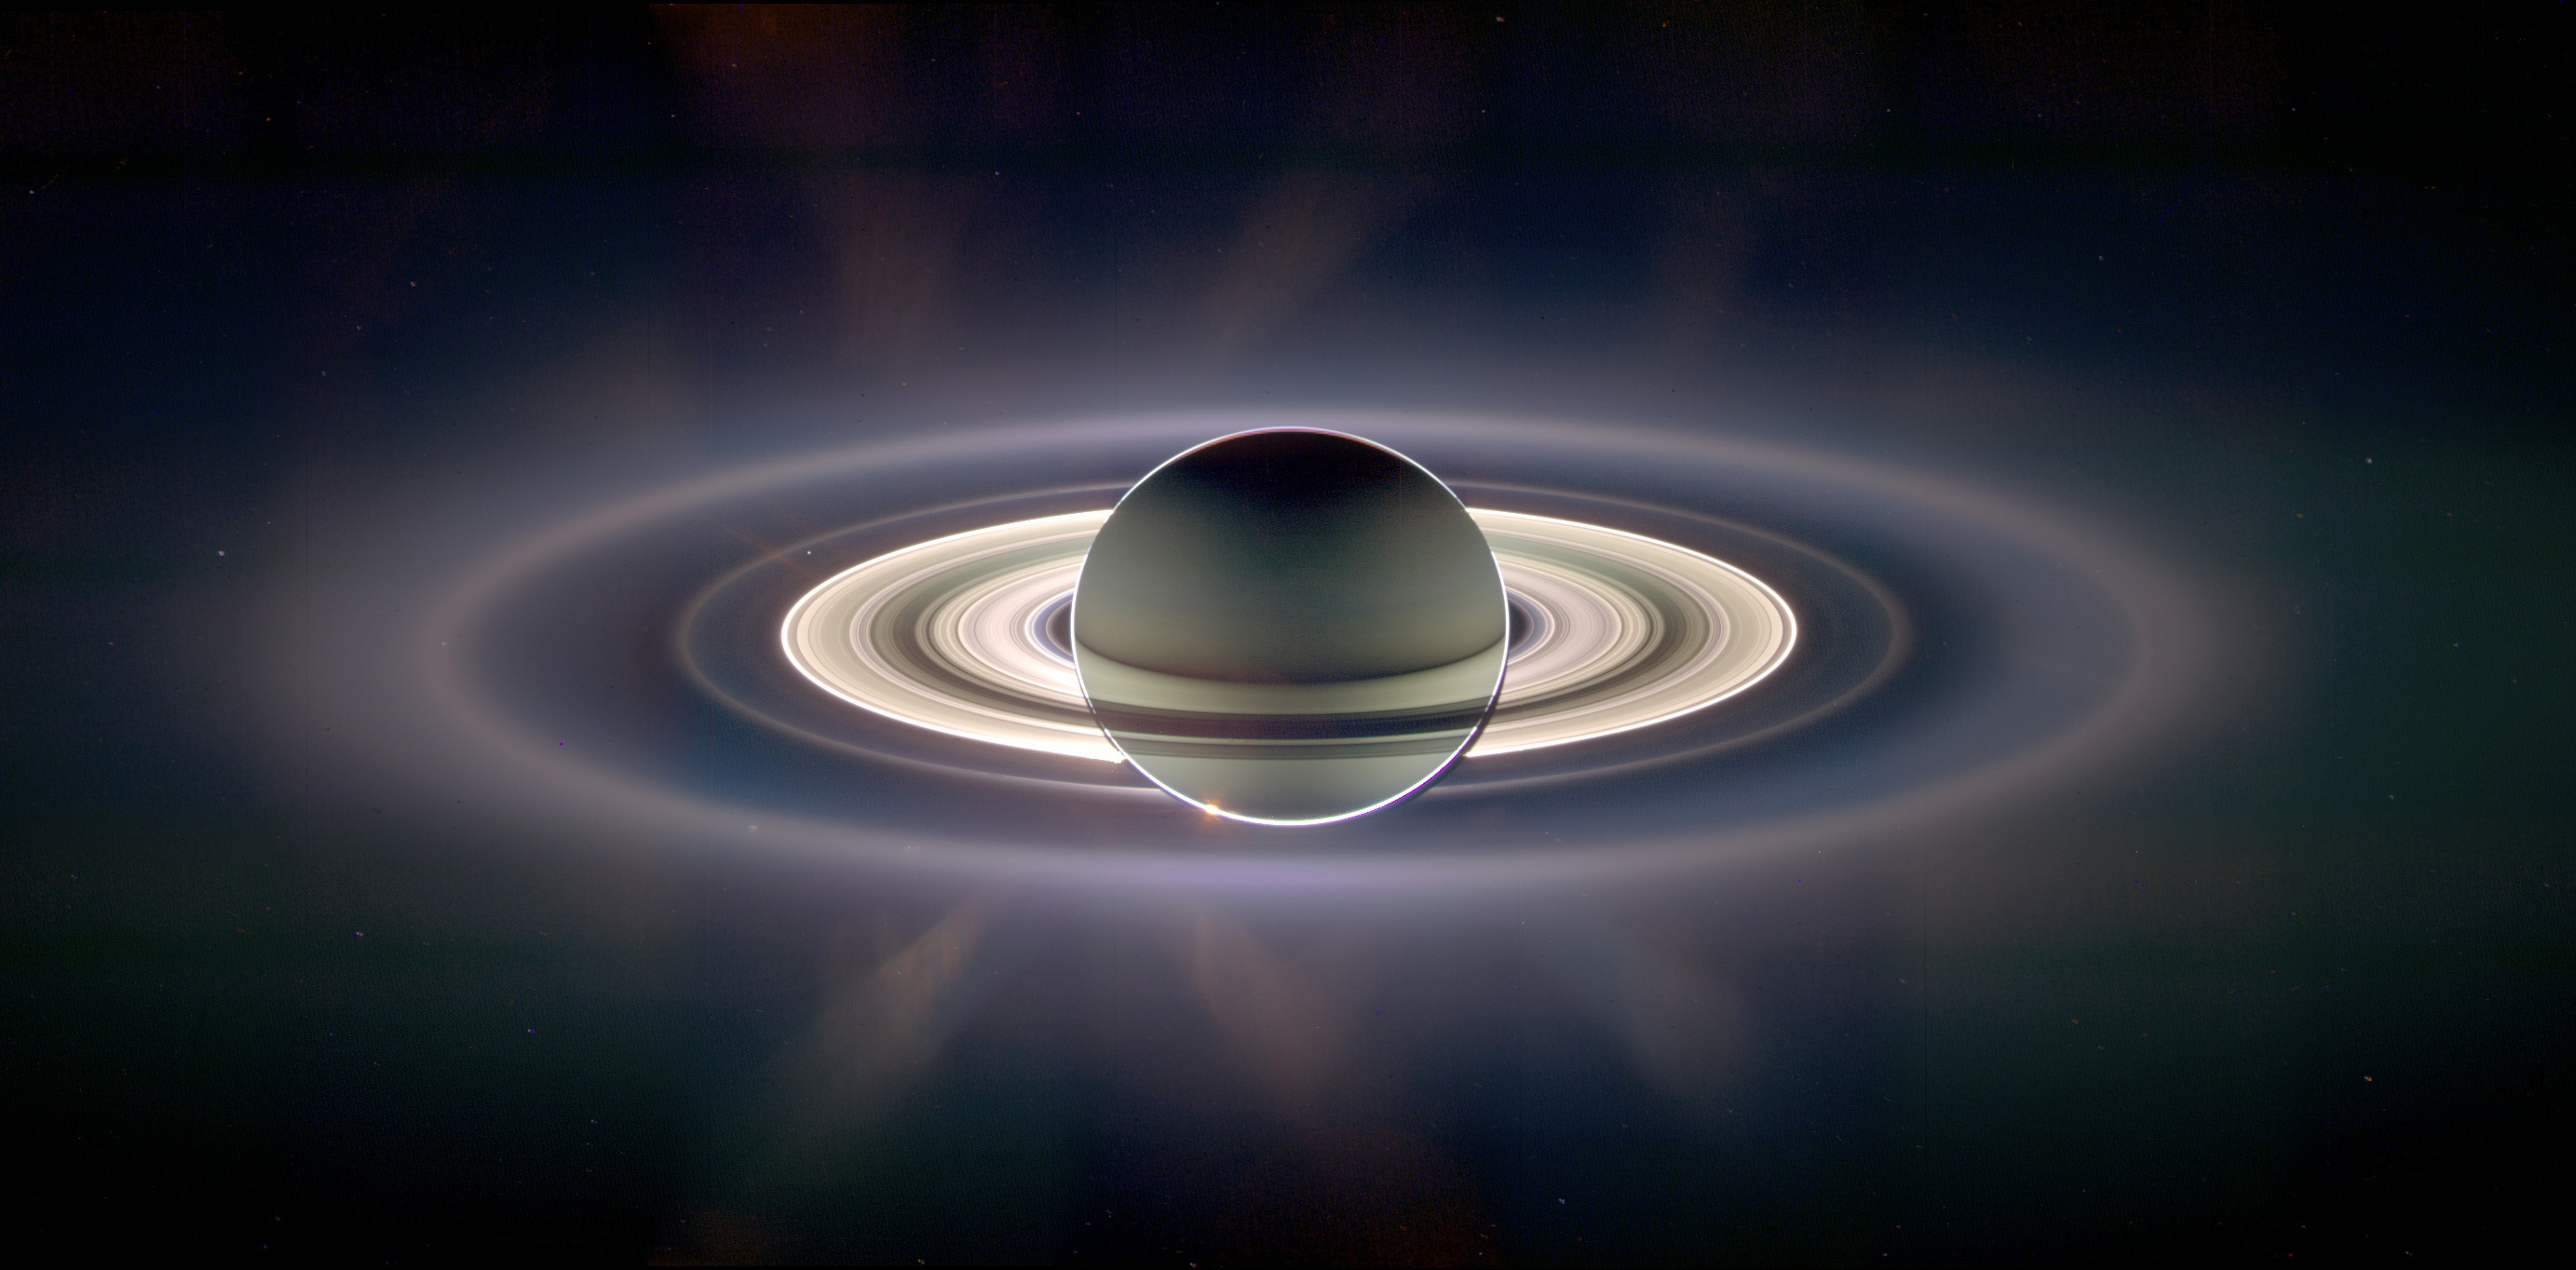 APOD: 2011 September 4 - In the Shadow of Saturn